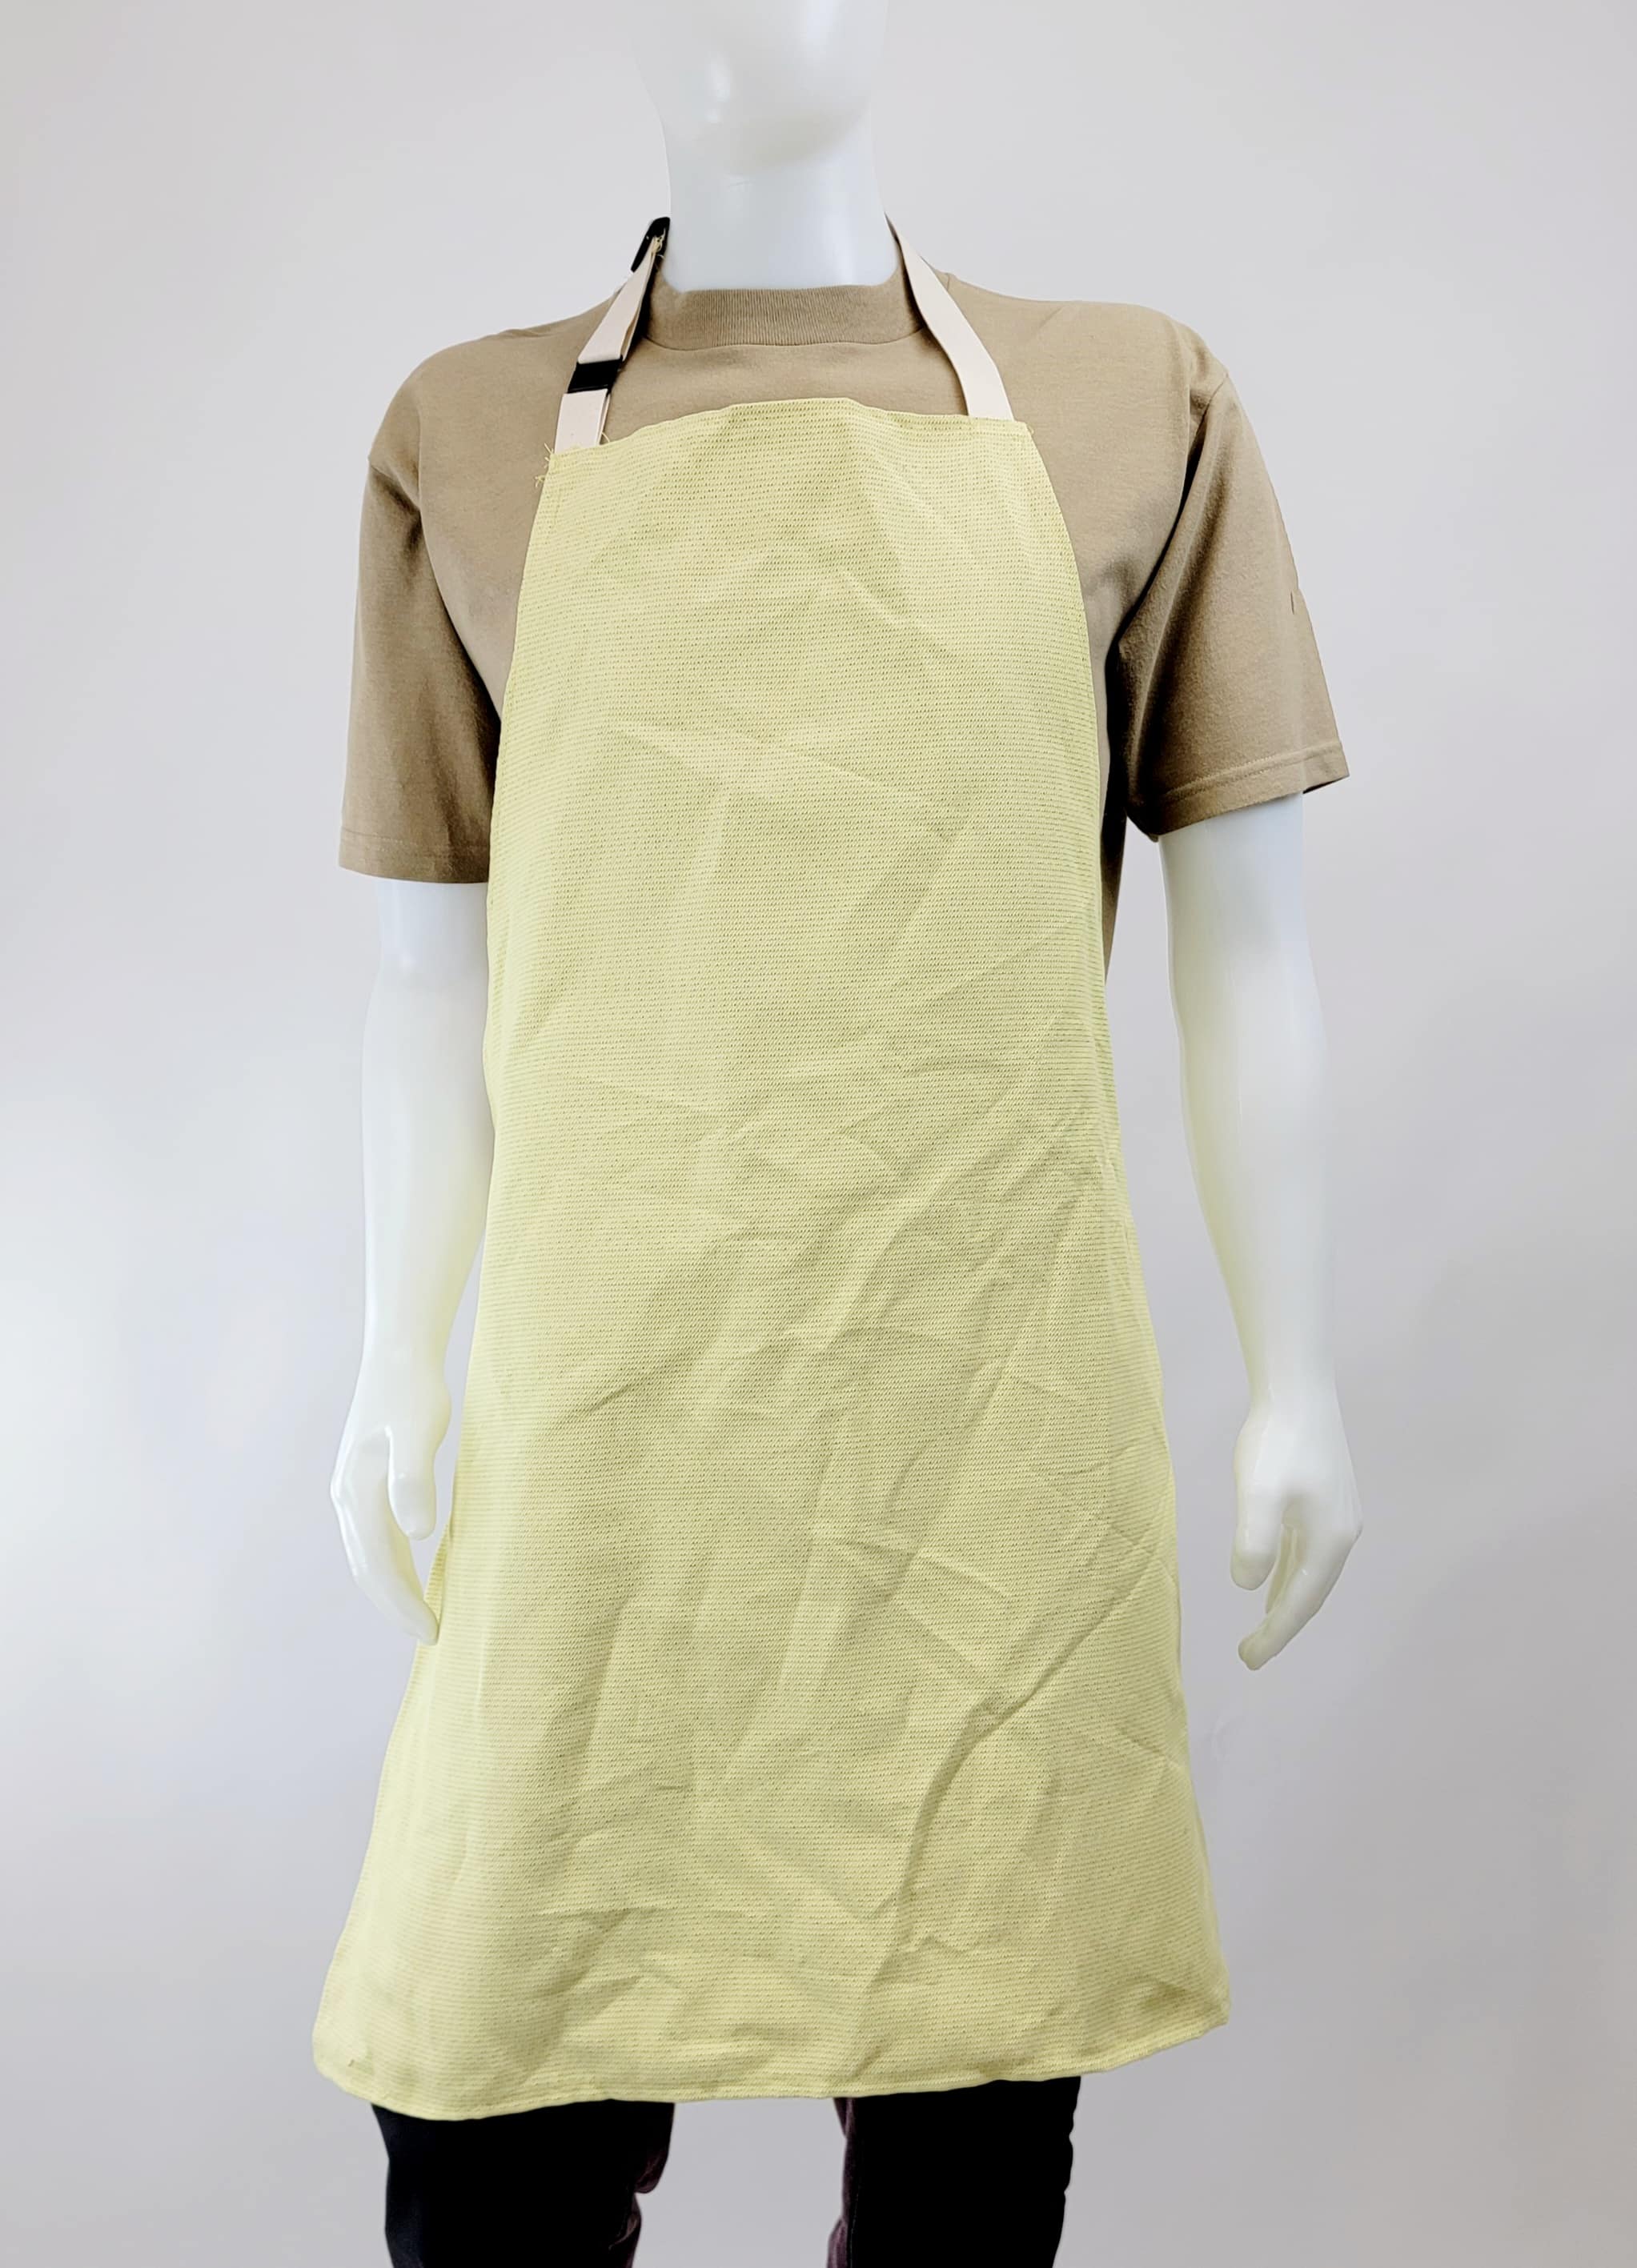 Cut and Puncture Aprons